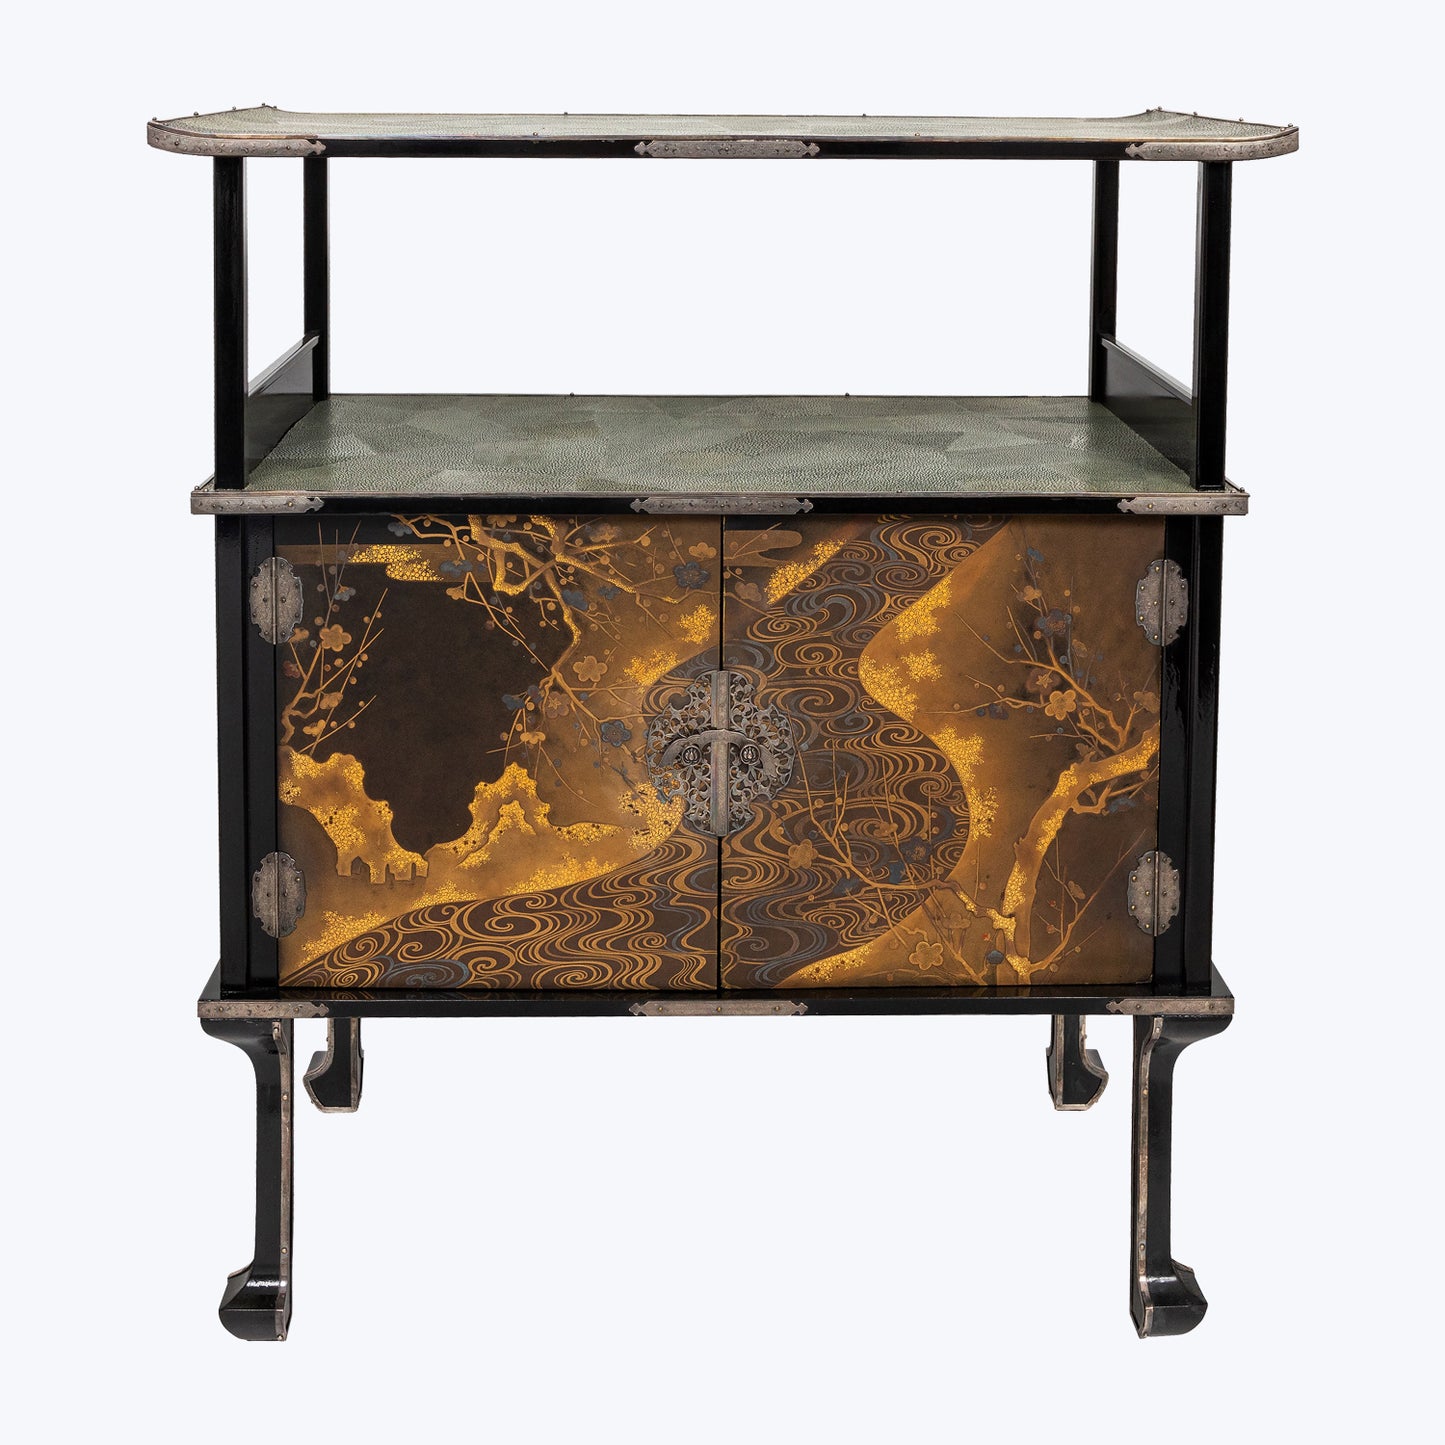 Japanese Lacquer Cabinet with Galuchat